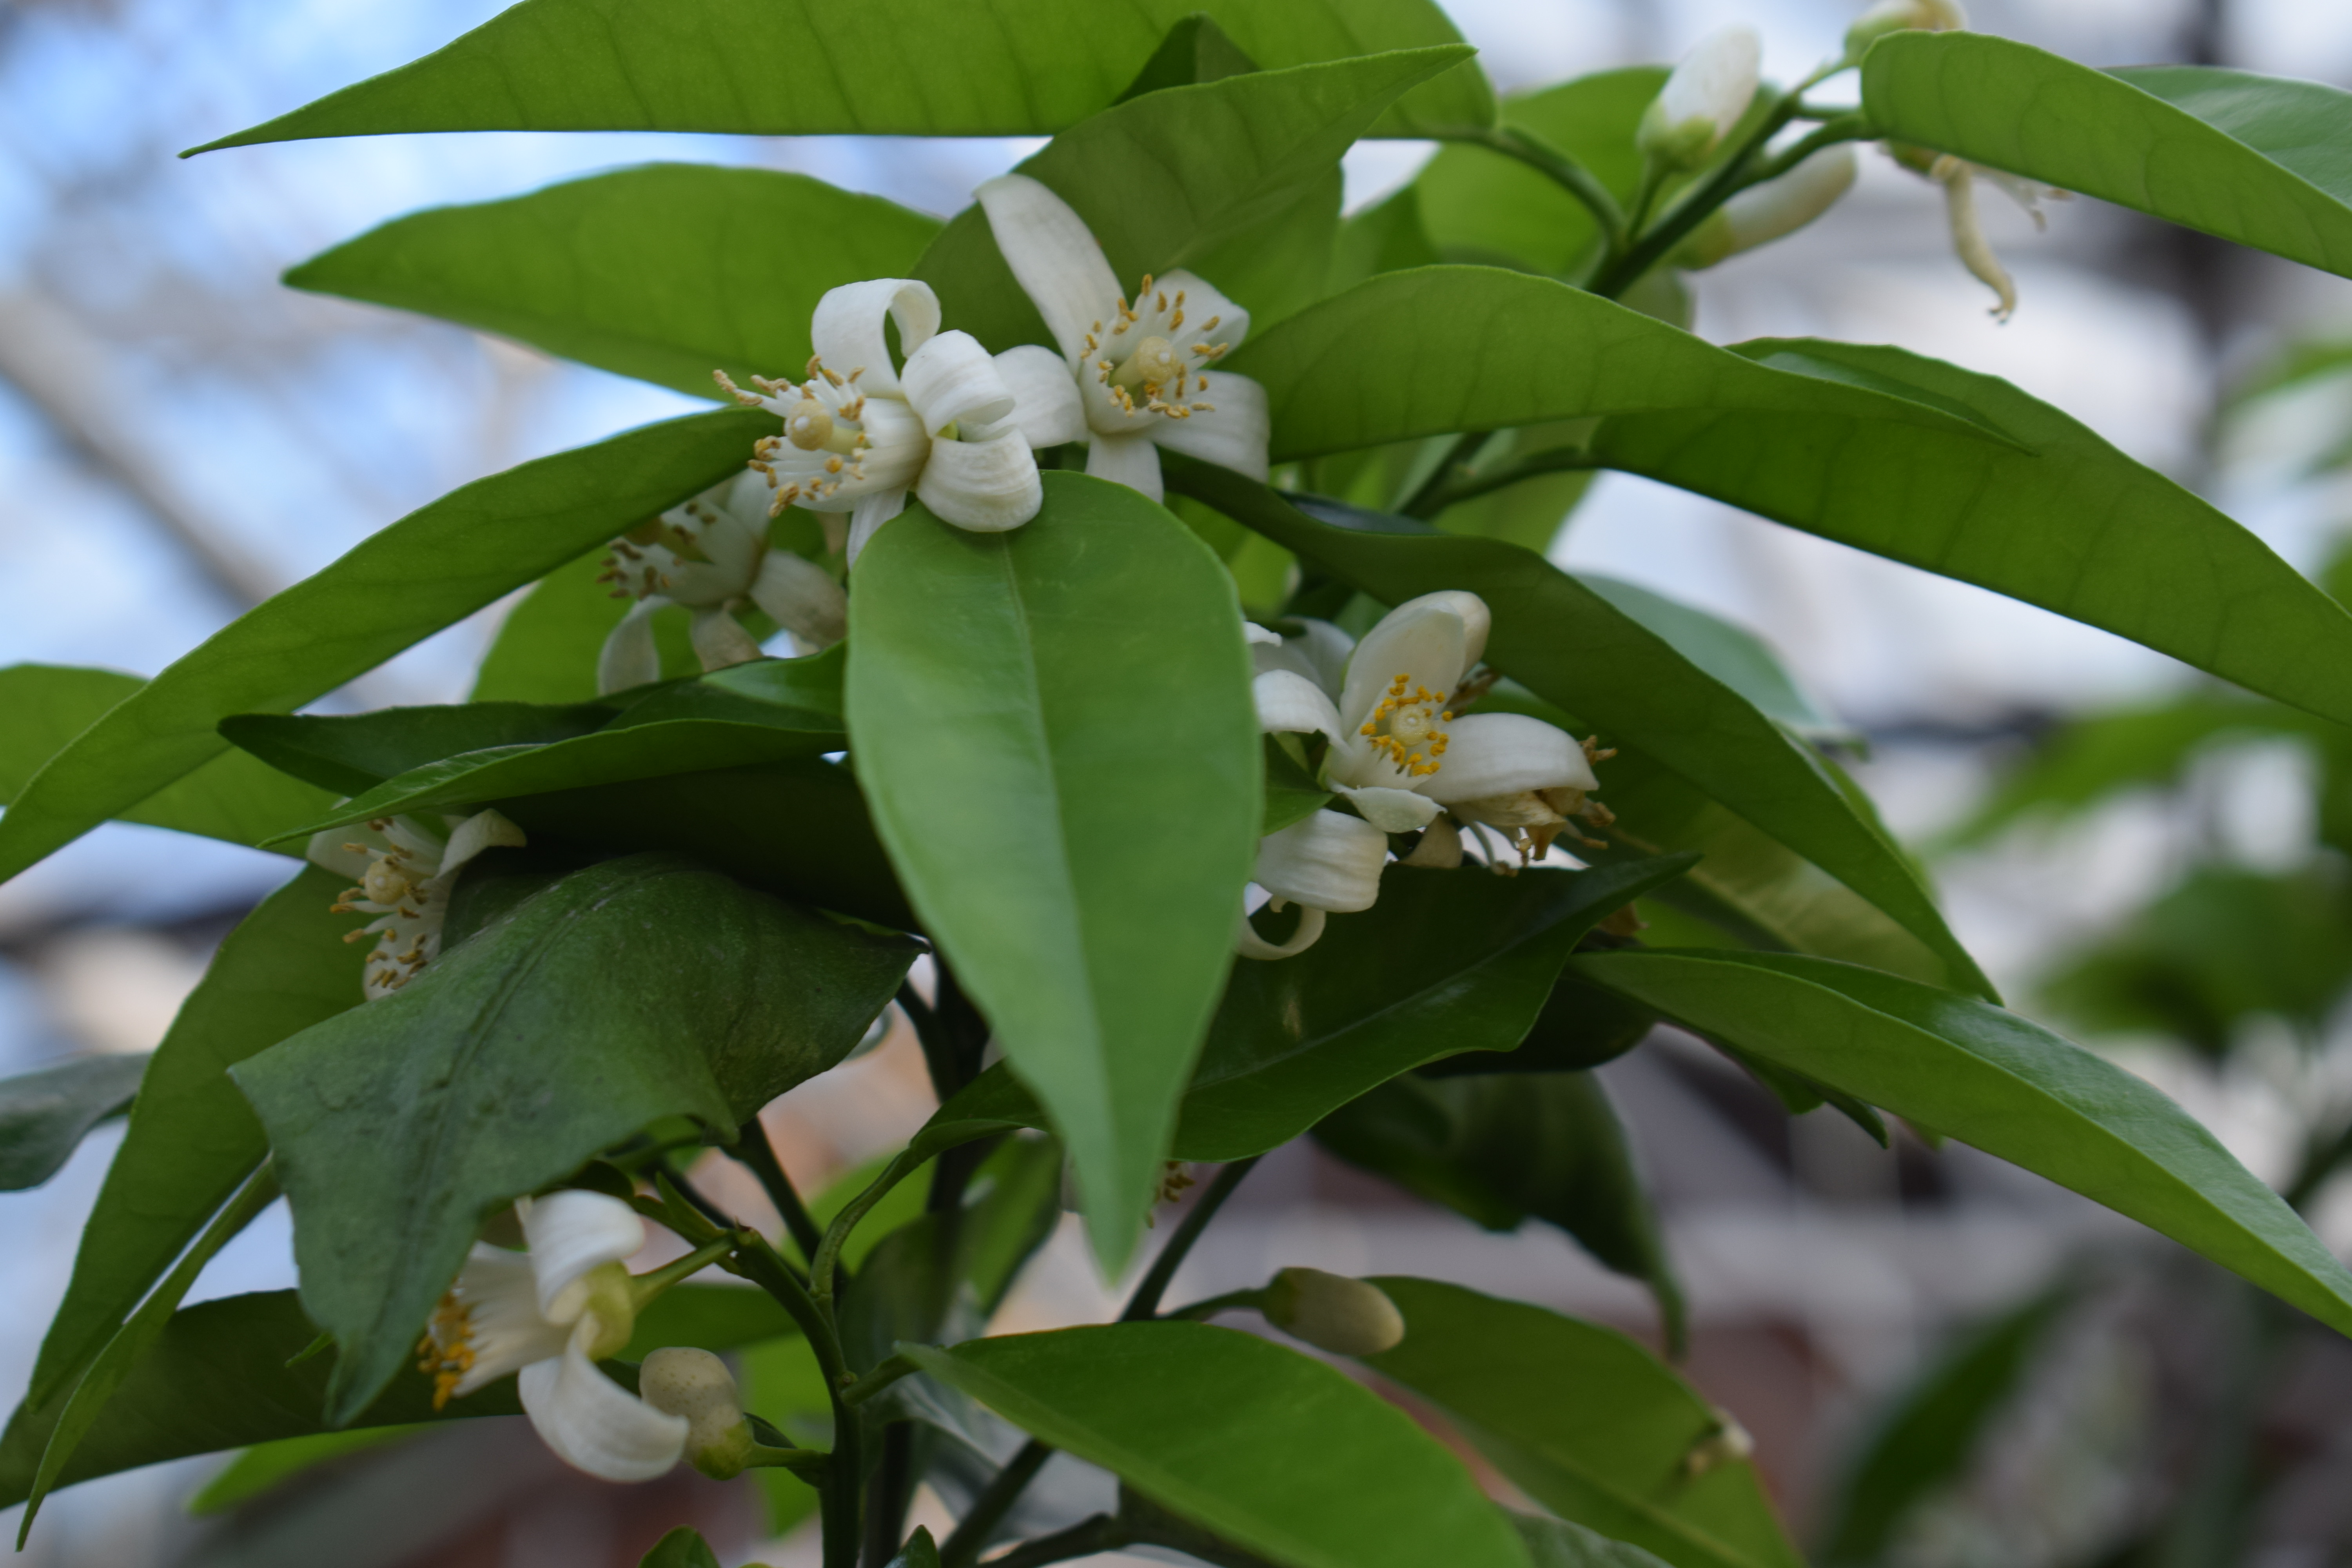 It's the Weekend Number 44, Orange Blossoms